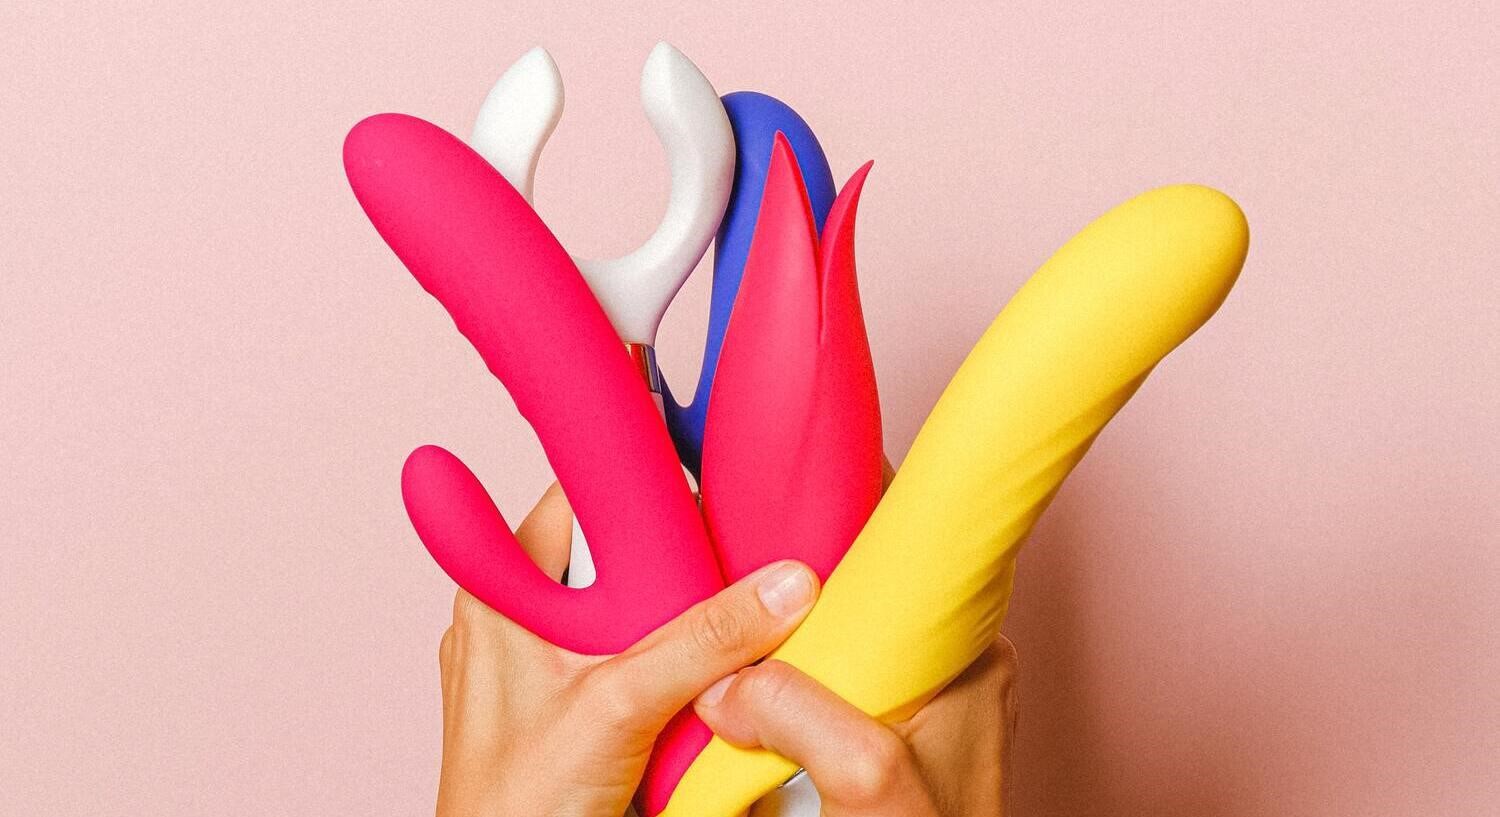 different types of vibrators and sex toys